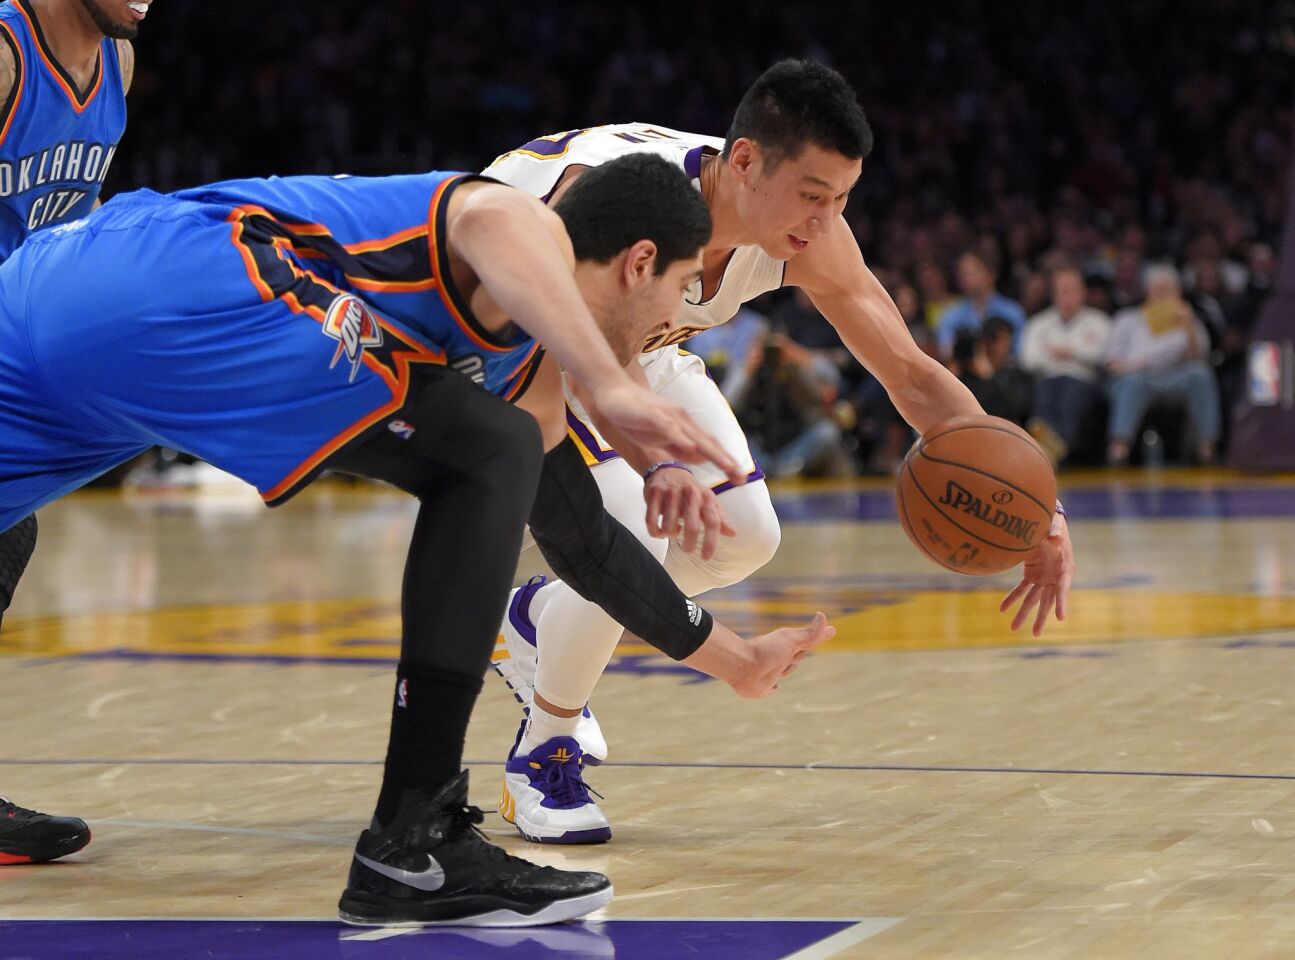 Lakers point guard Jeremy Lin and Thunder center Enes Kanter both go after a loose ball during the first half.